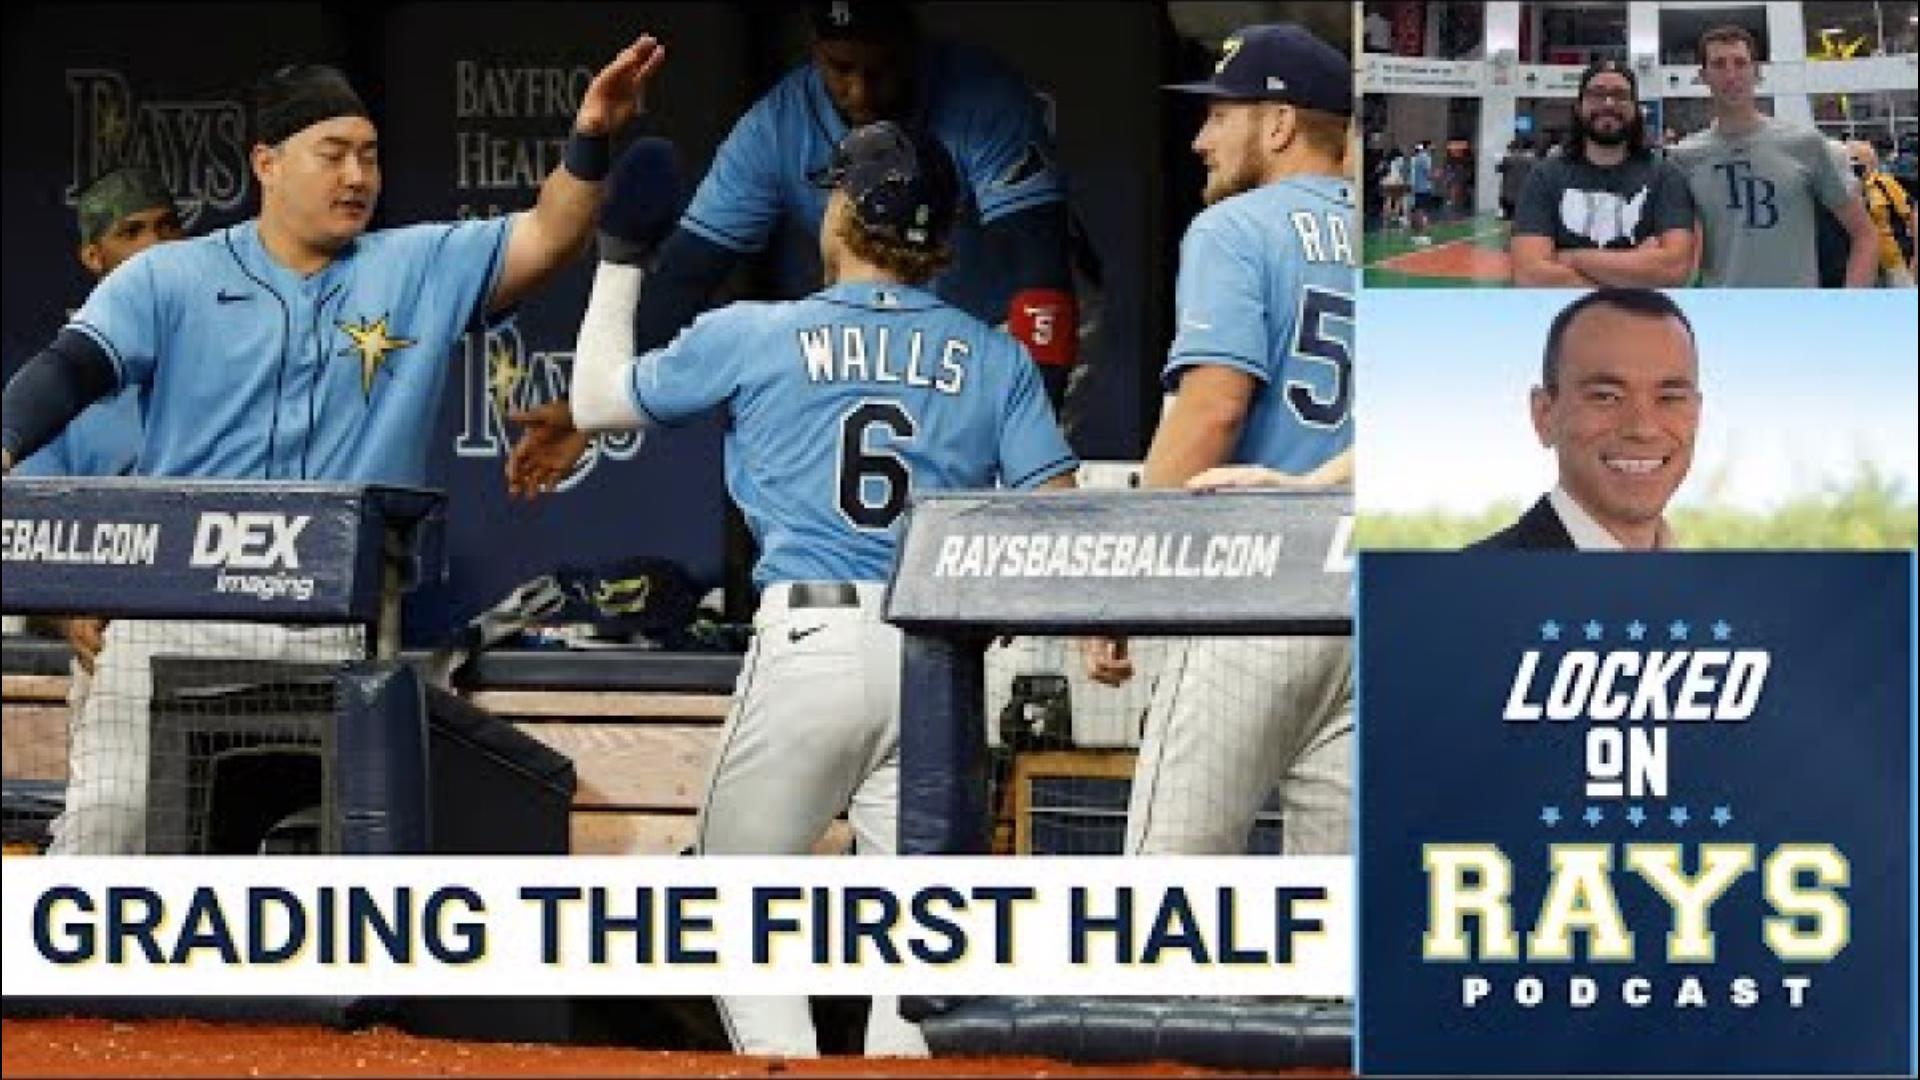 After the slew of injuries in 2022, the Rays find themselves 51-41, in firm place of the 1st AL Wildcard spot.